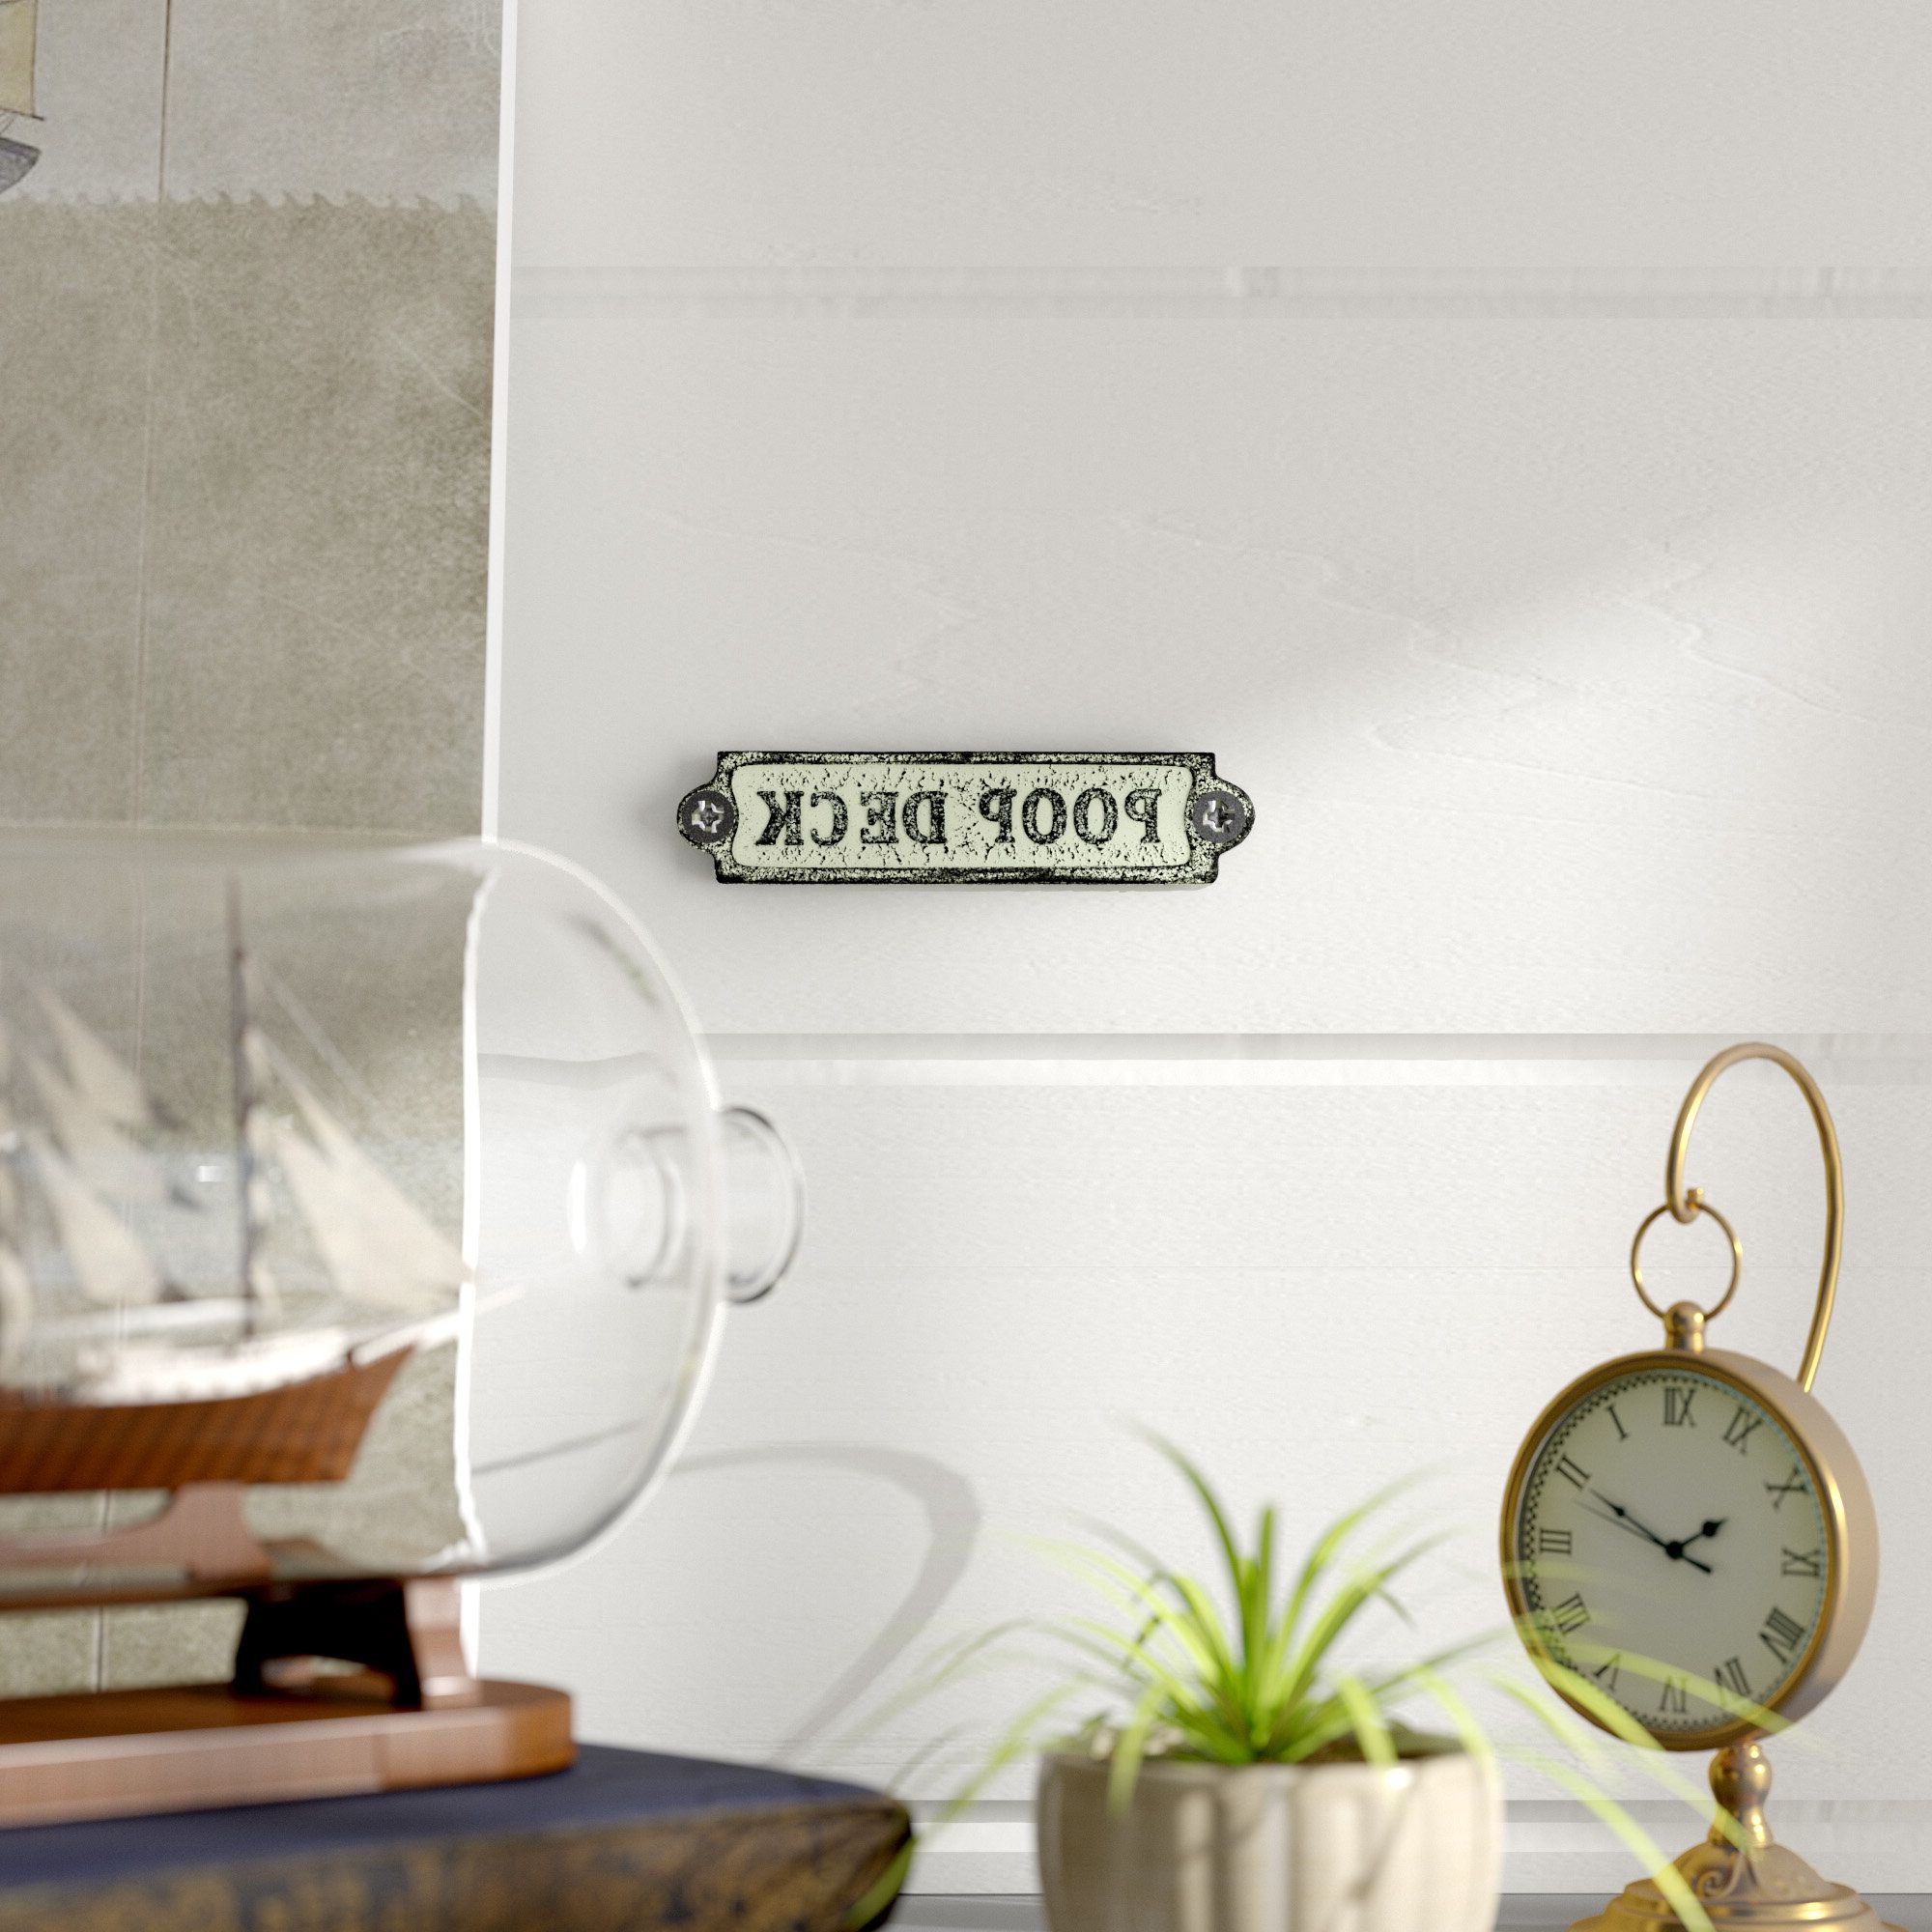 Widely Used Coastal Poop Deck Sign Wall Décor Regarding 6" Chrome Poop Deck Sign Wall Décor (View 2 of 17)